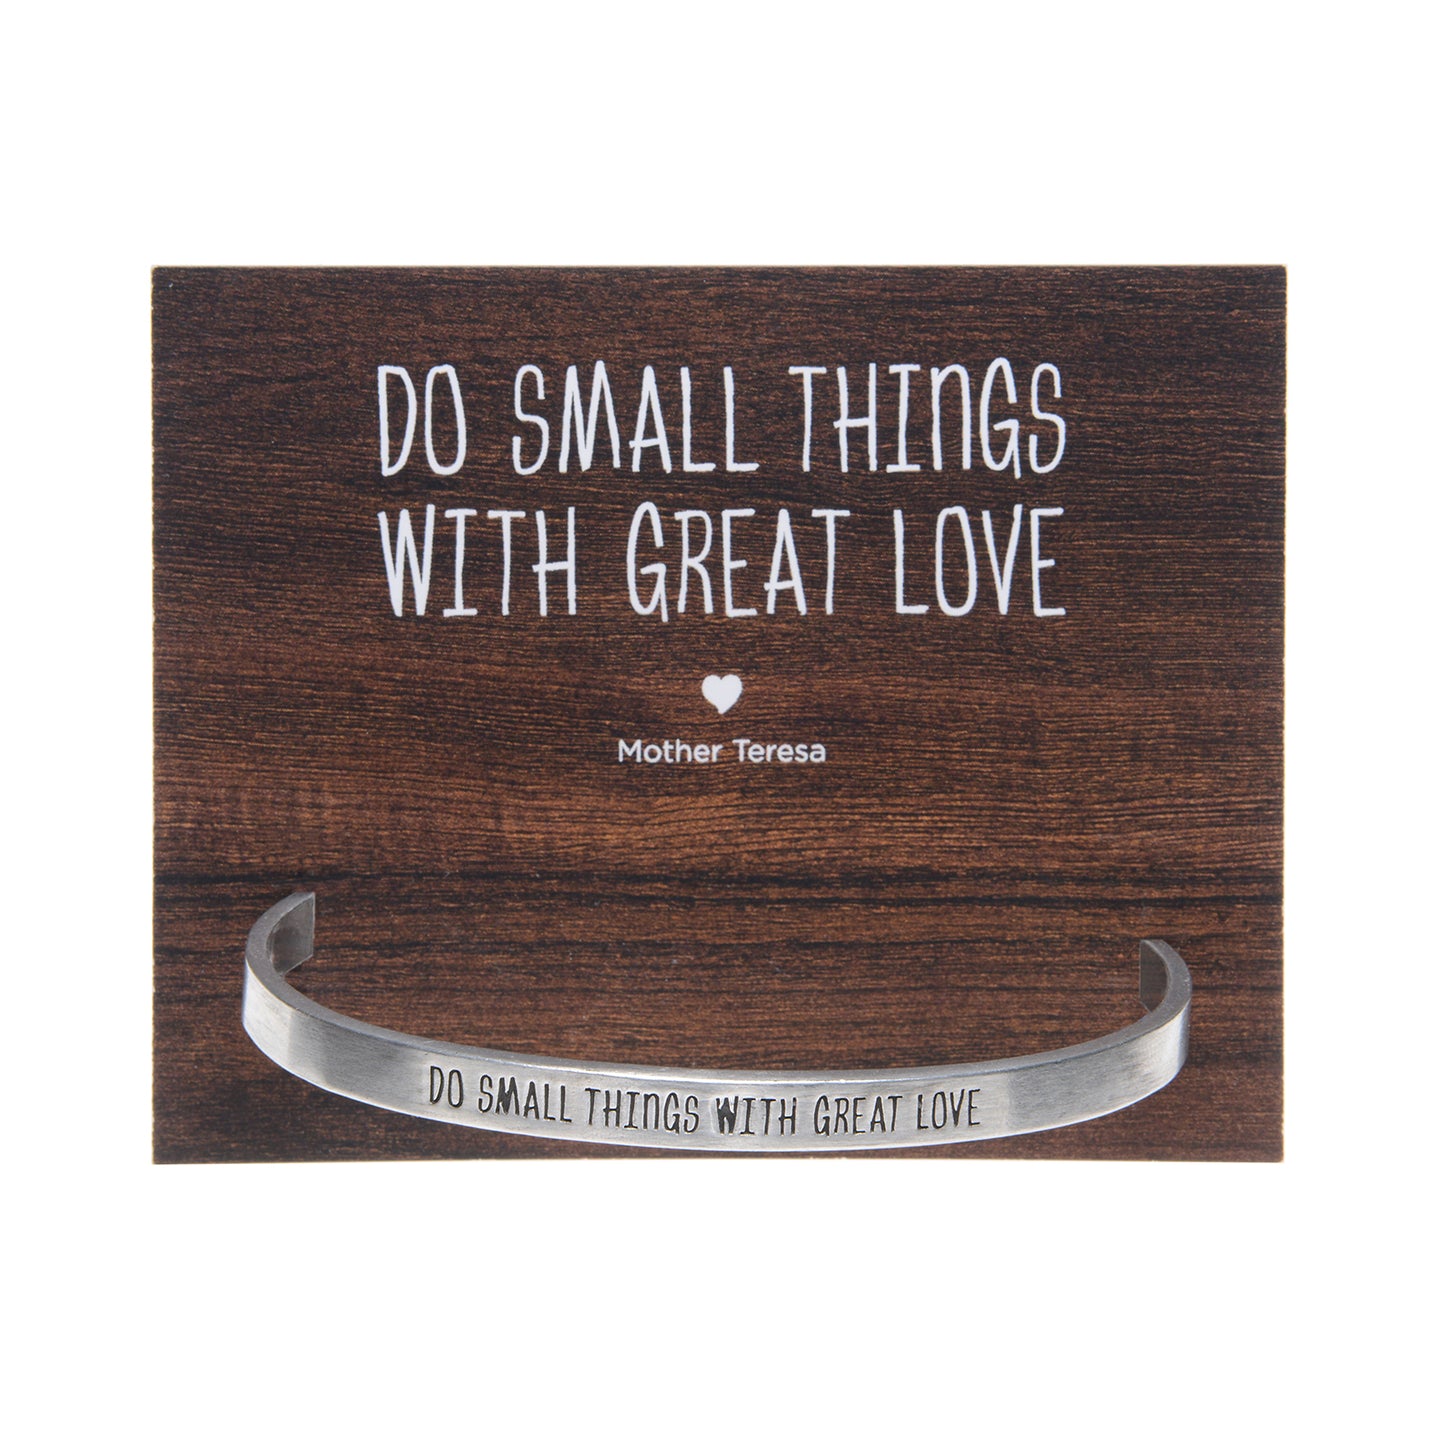 Do Small Things with Great Love Quotable Cuff Bracelet - Mother Teresa on backer card